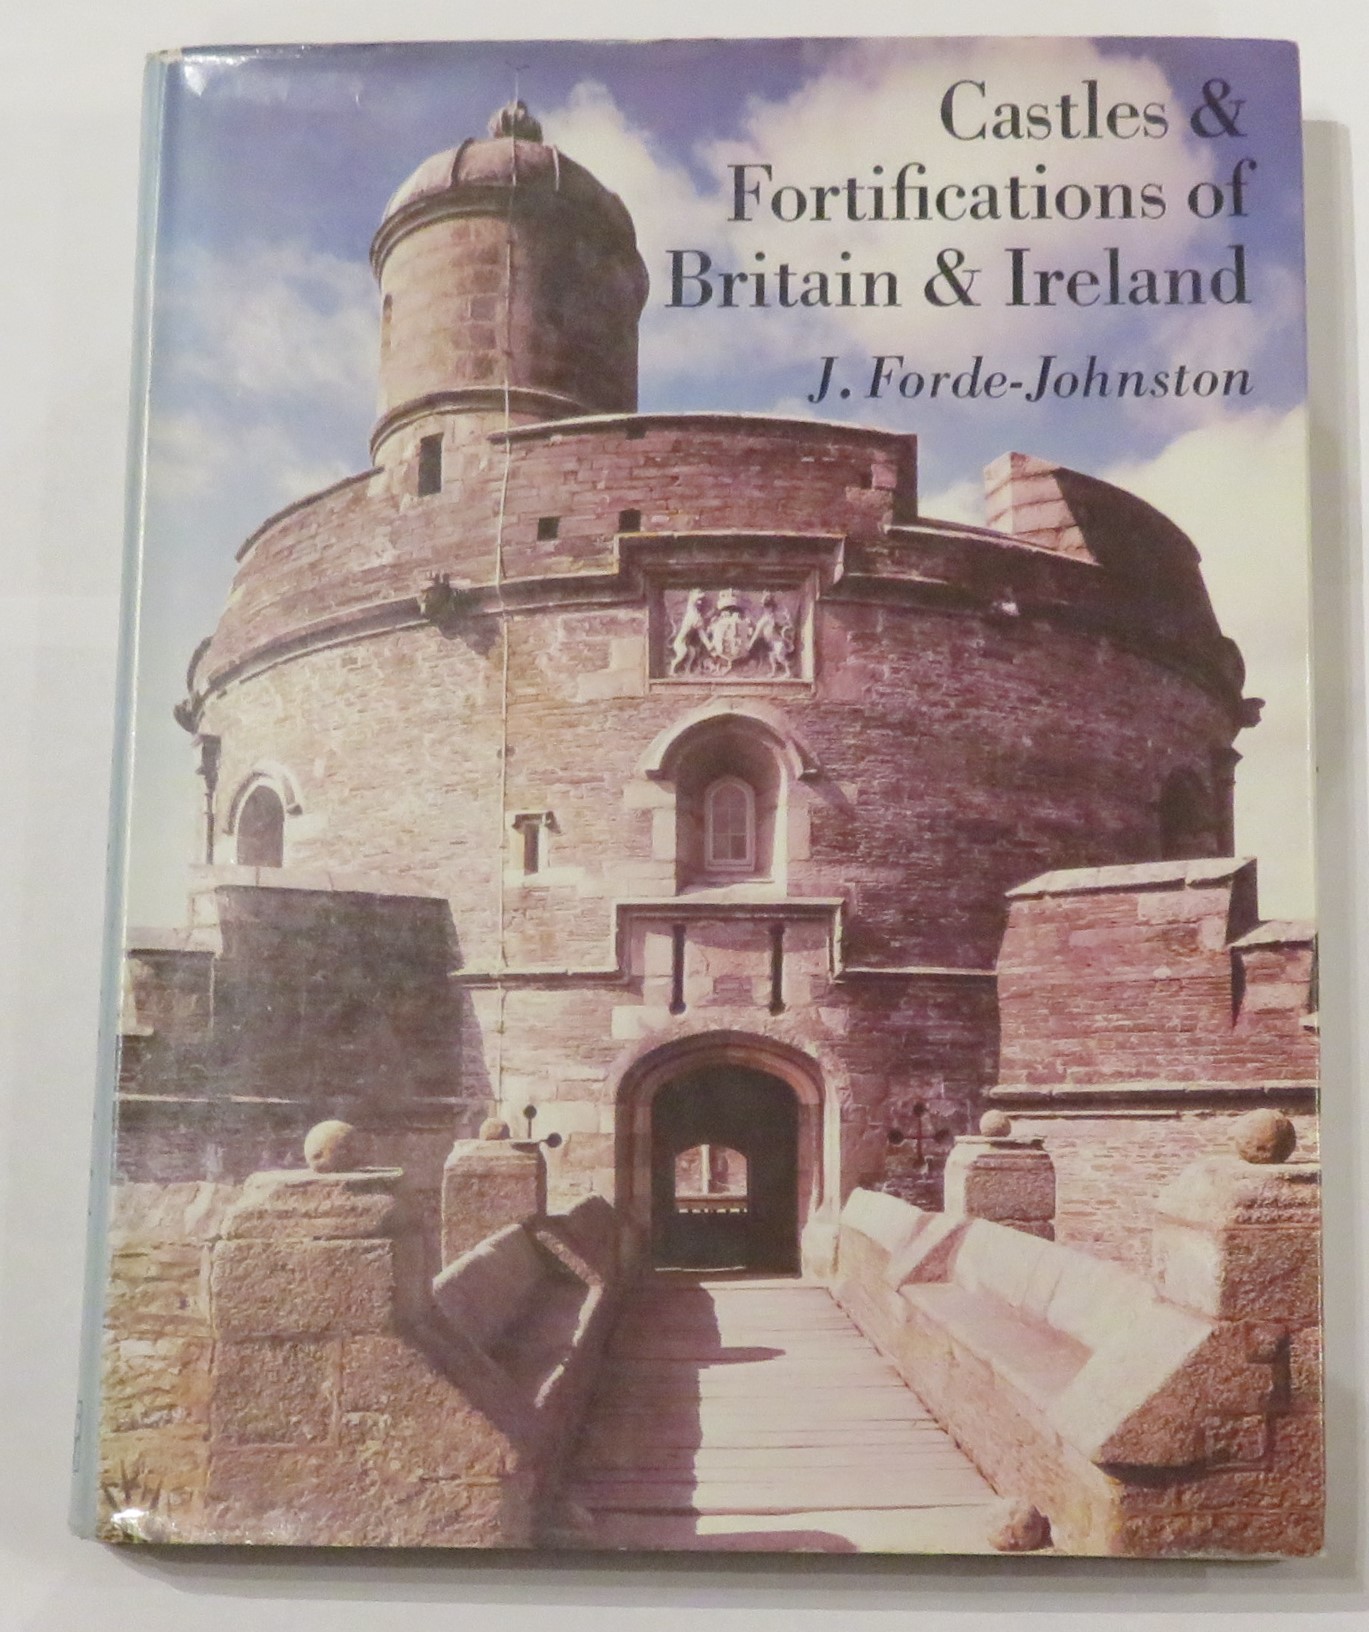 Castles & Fortifications of Britain & Ireland